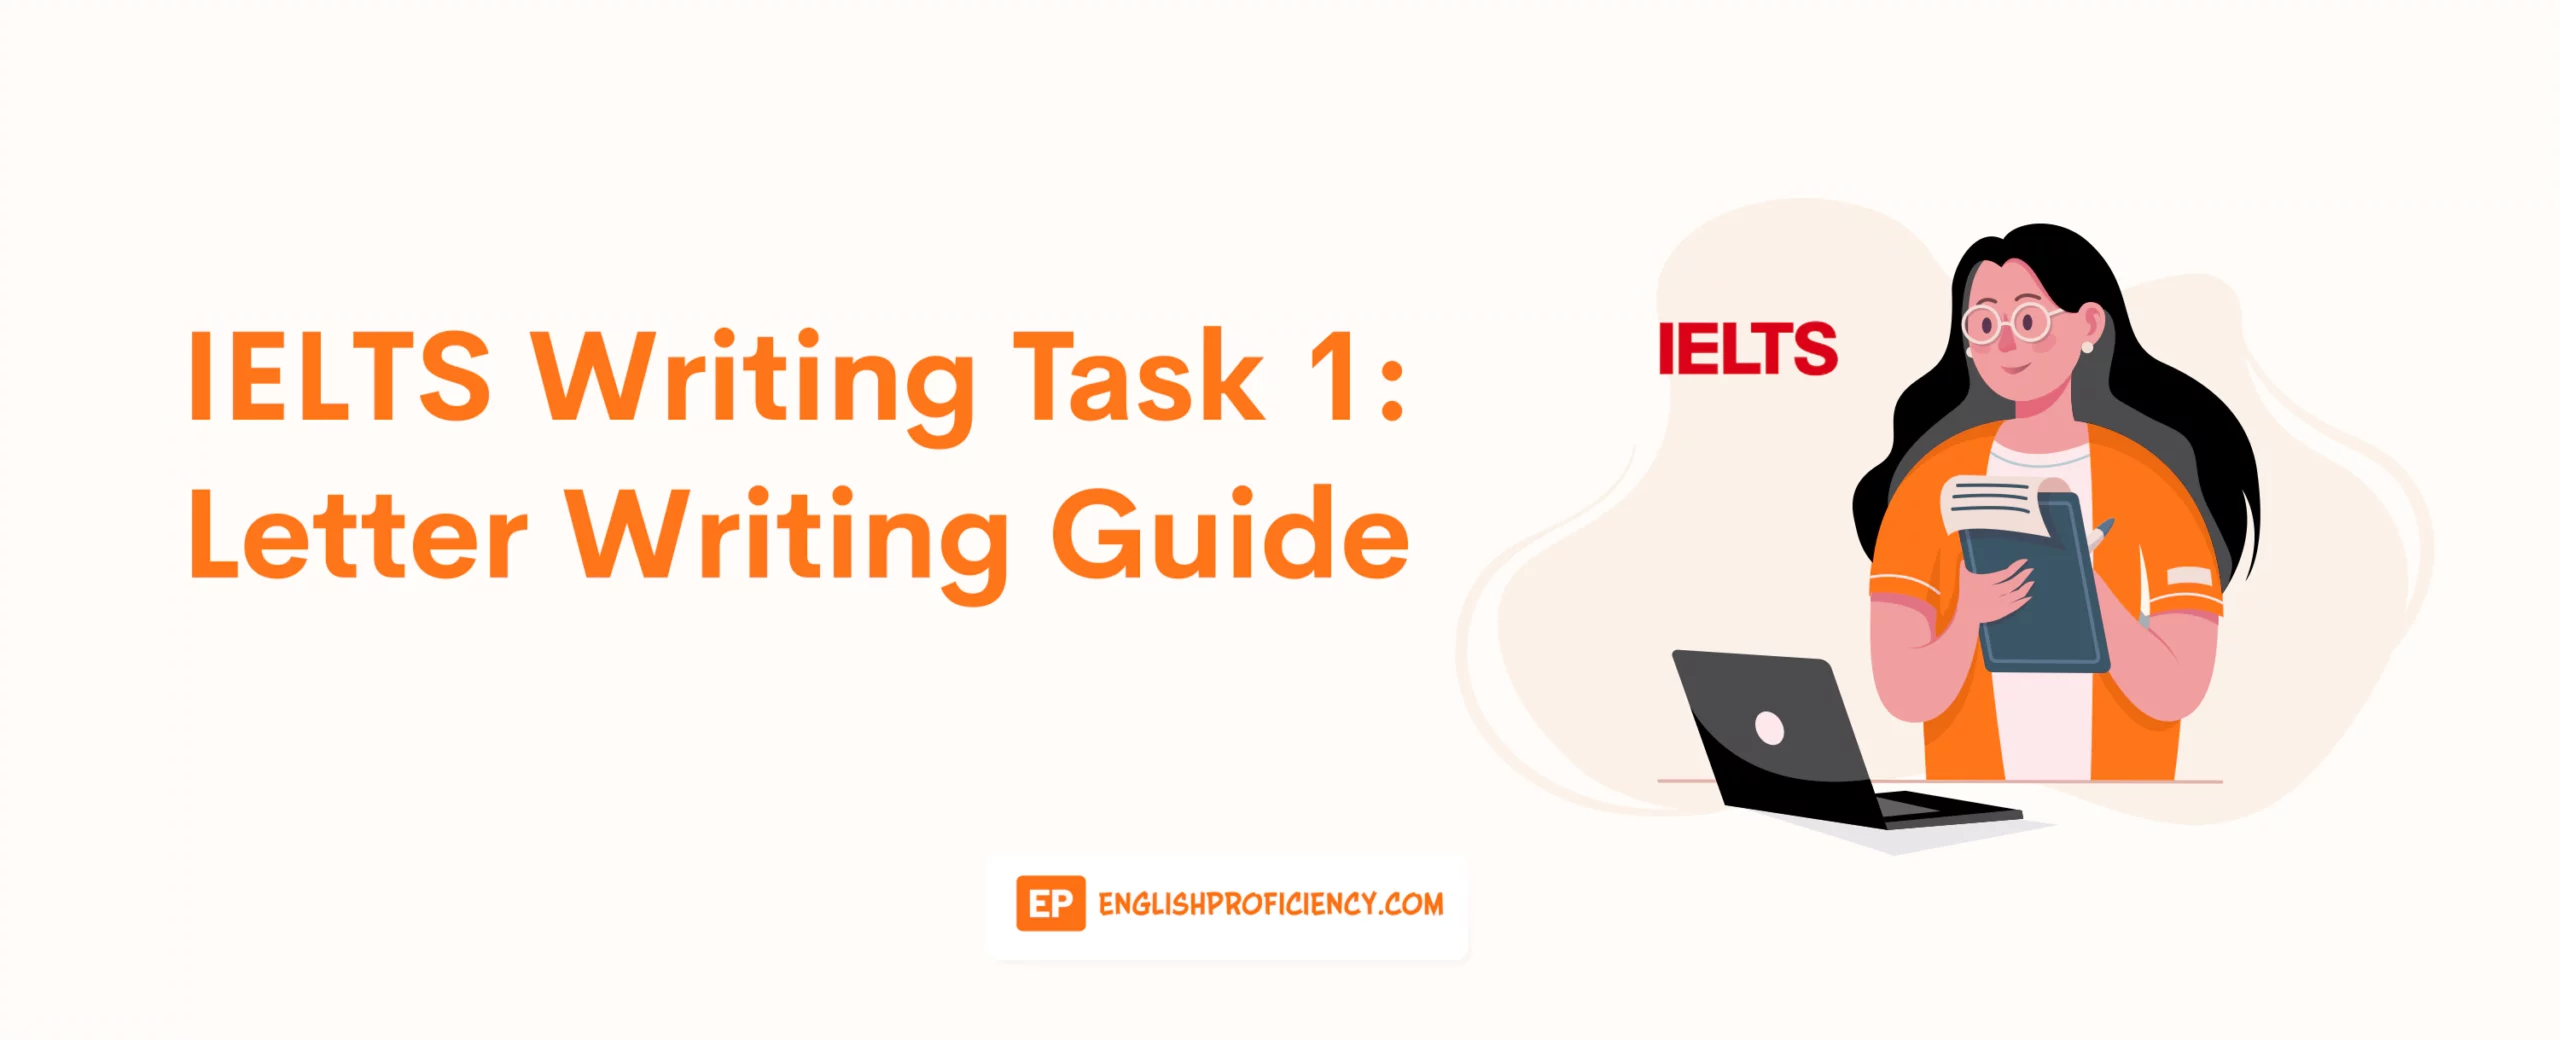 IELTS Writing Task 1 Letter Writing Guide